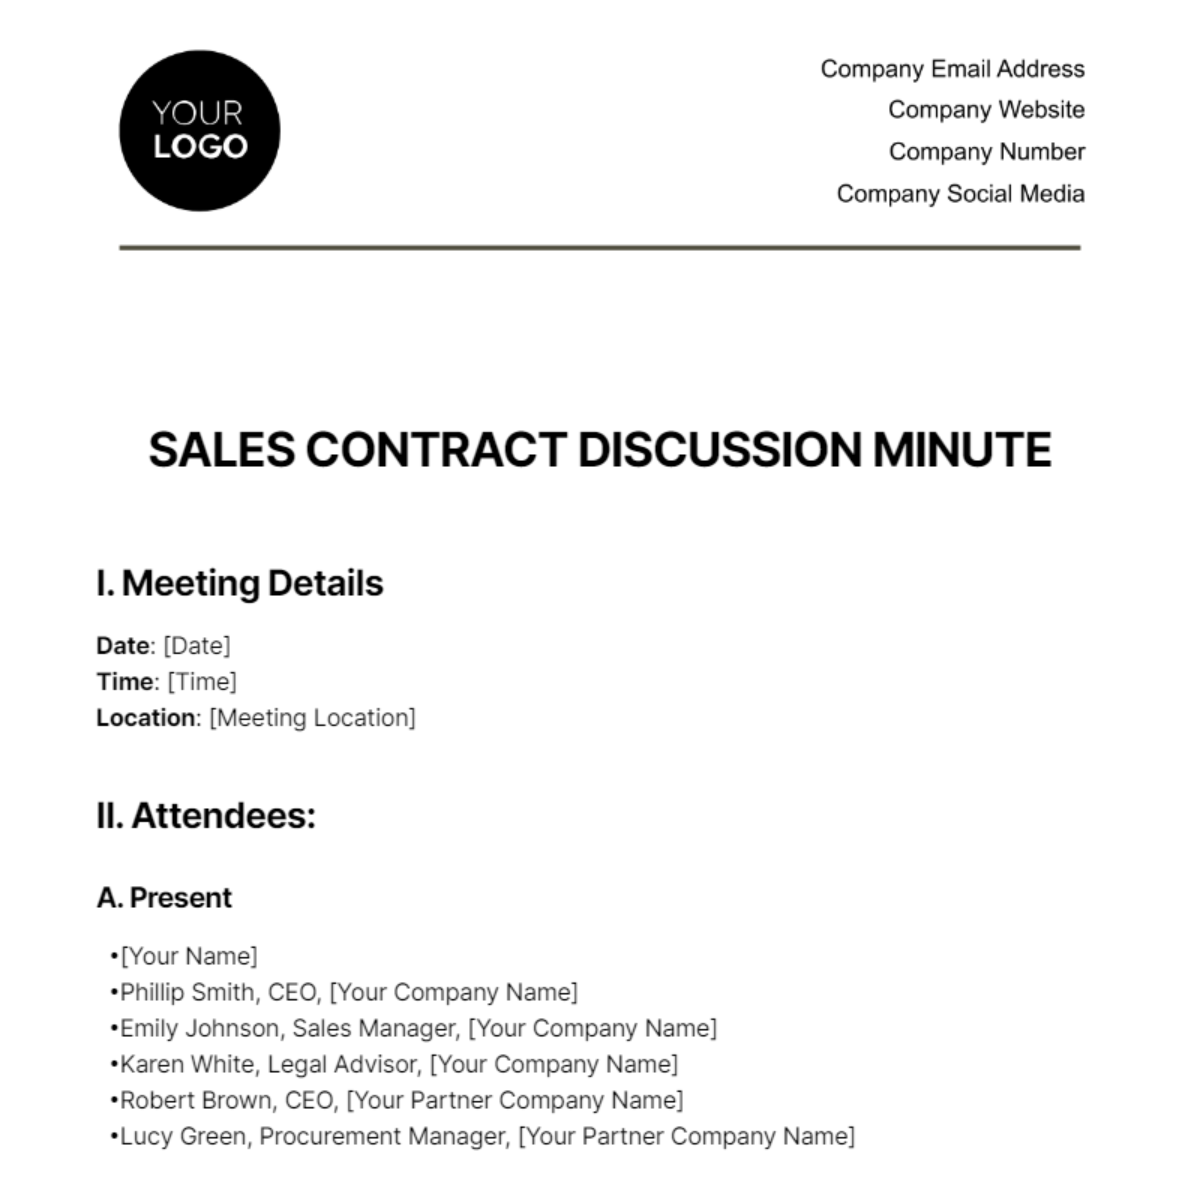 Sales Contract Discussion Minute Template